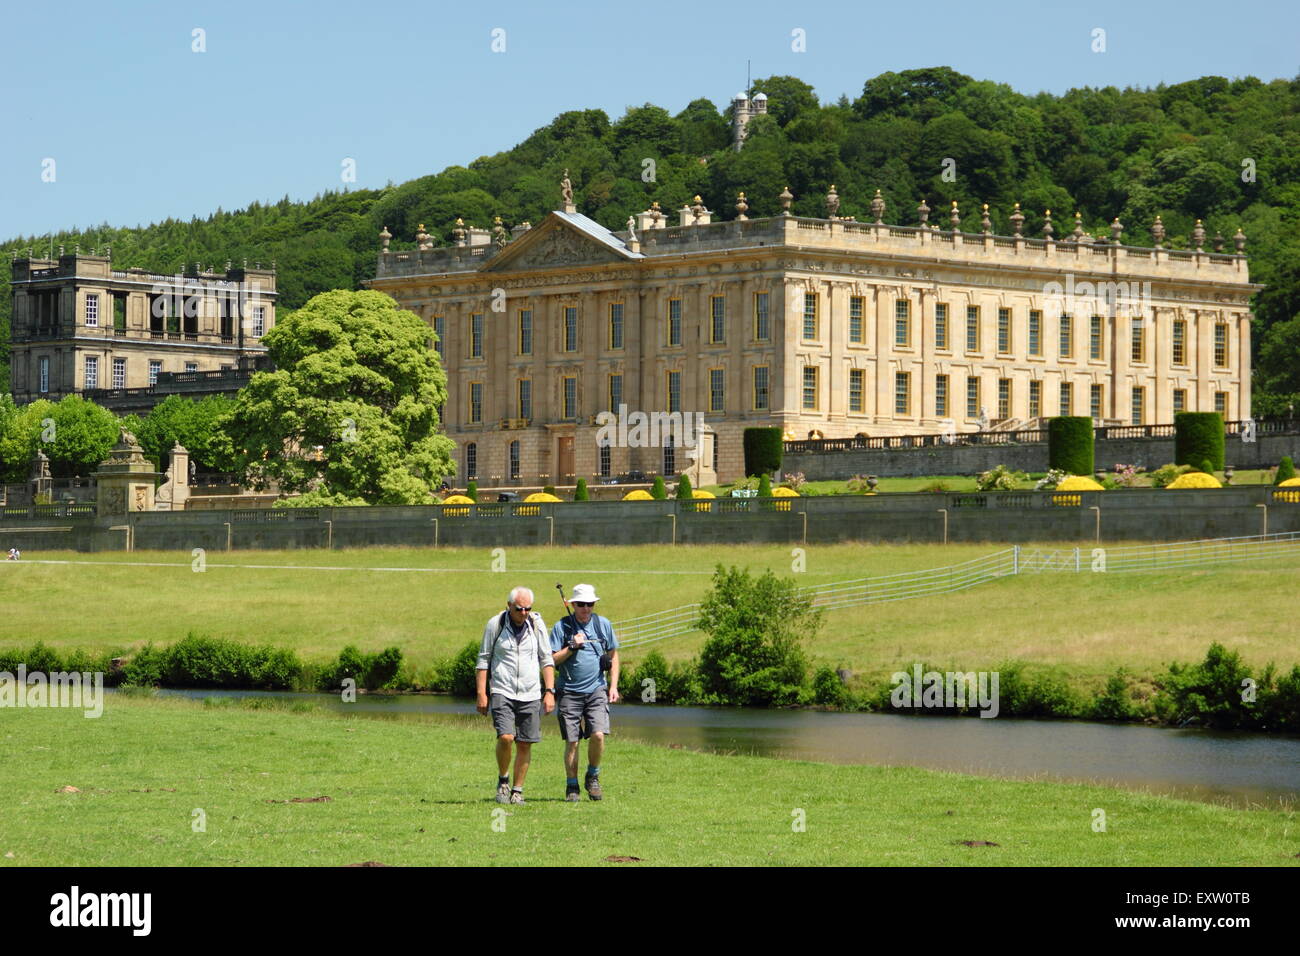 Two men walk on the banks of the River Derwent by Chatsworth House in the Peak District on a glorious summer day, Derbyshire UK Stock Photo